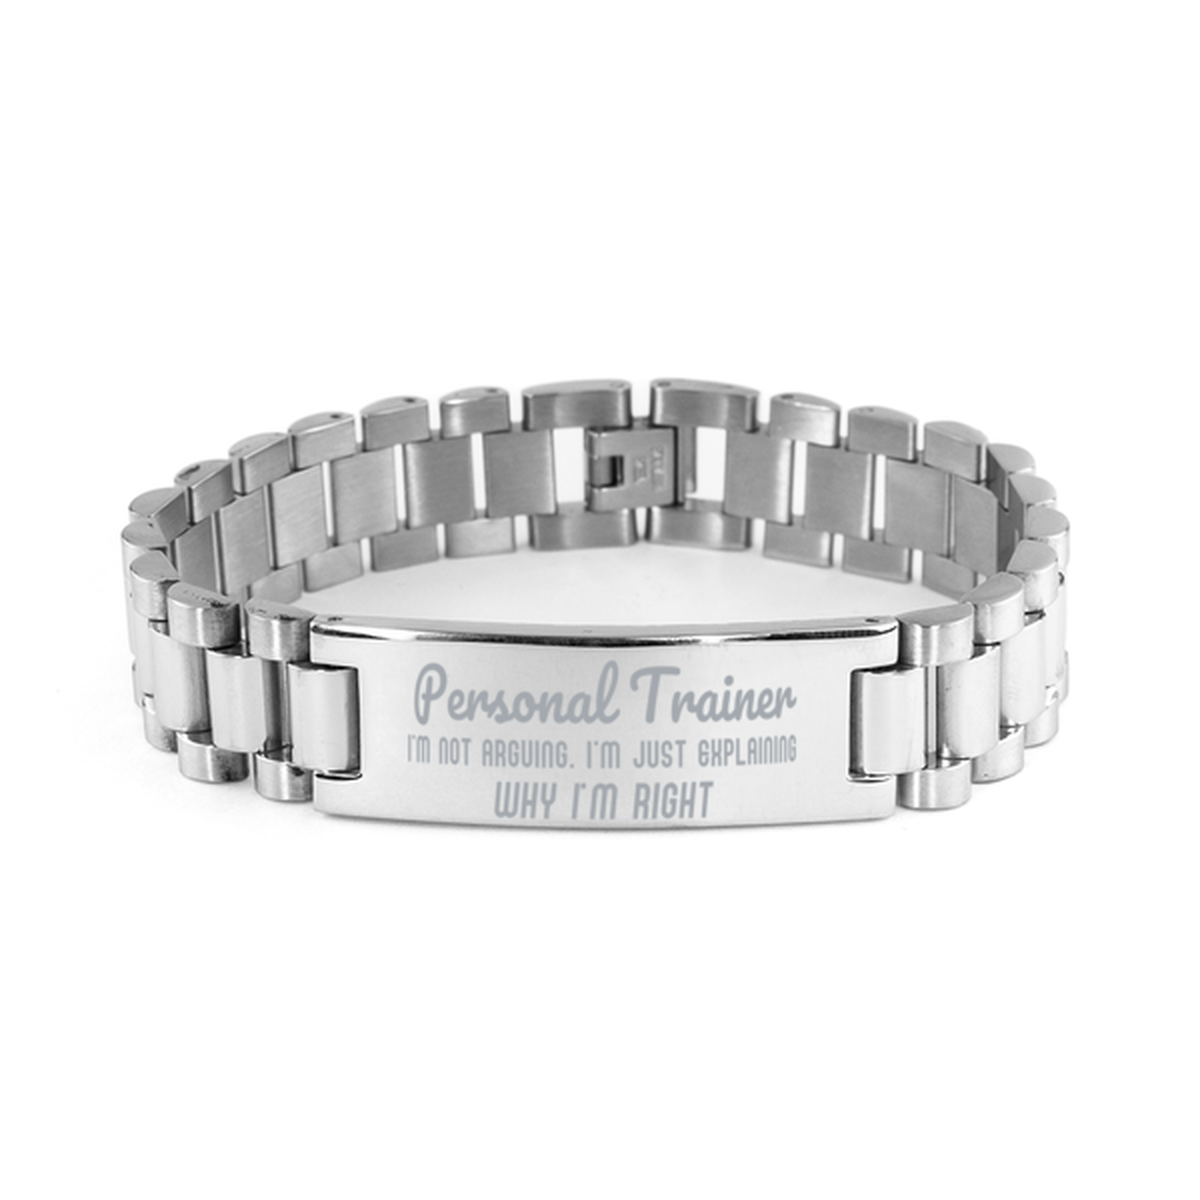 Personal Trainer I'm not Arguing. I'm Just Explaining Why I'm RIGHT Ladder Stainless Steel Bracelet, Graduation Birthday Christmas Personal Trainer Gifts For Personal Trainer Funny Saying Quote Present for Men Women Coworker